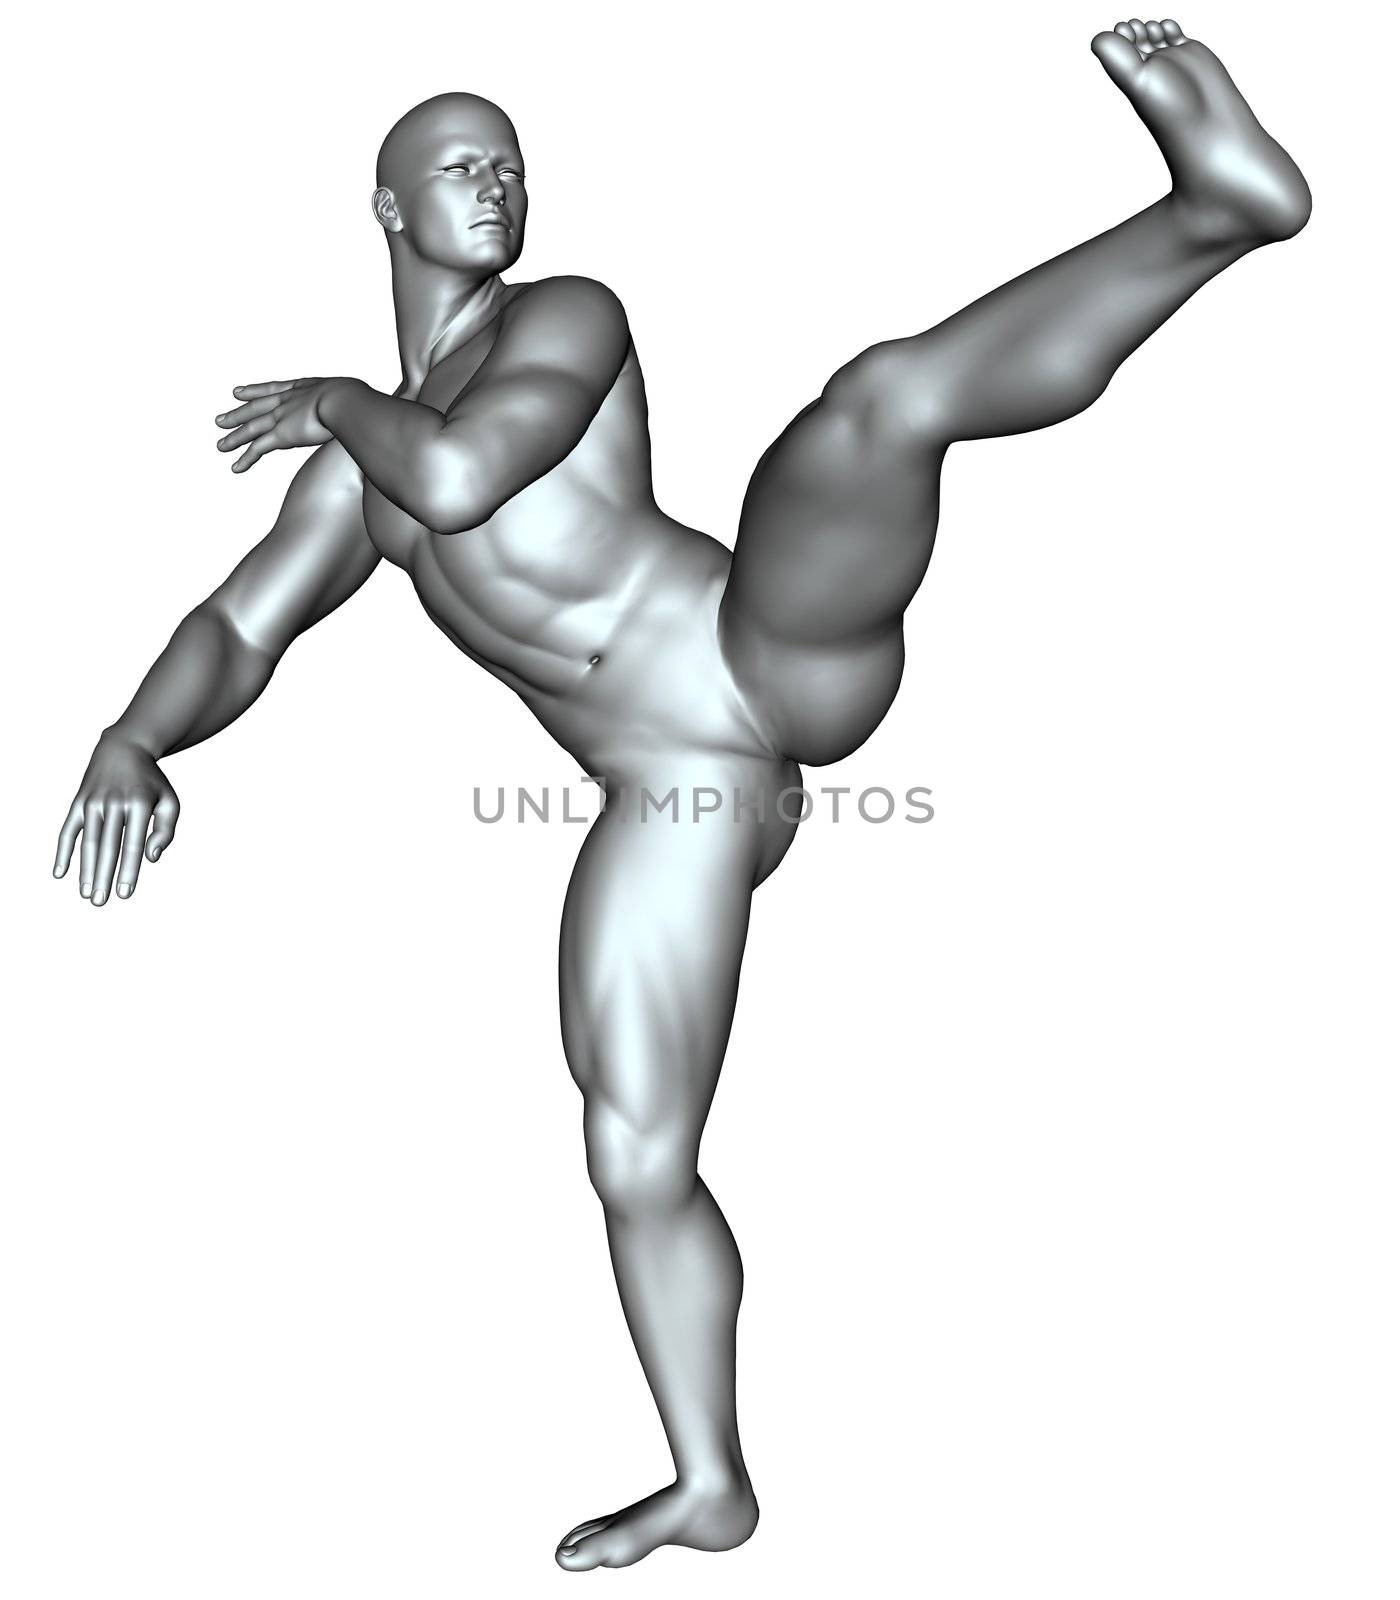 3D rendered fighter on martial arts poses on white background isolated